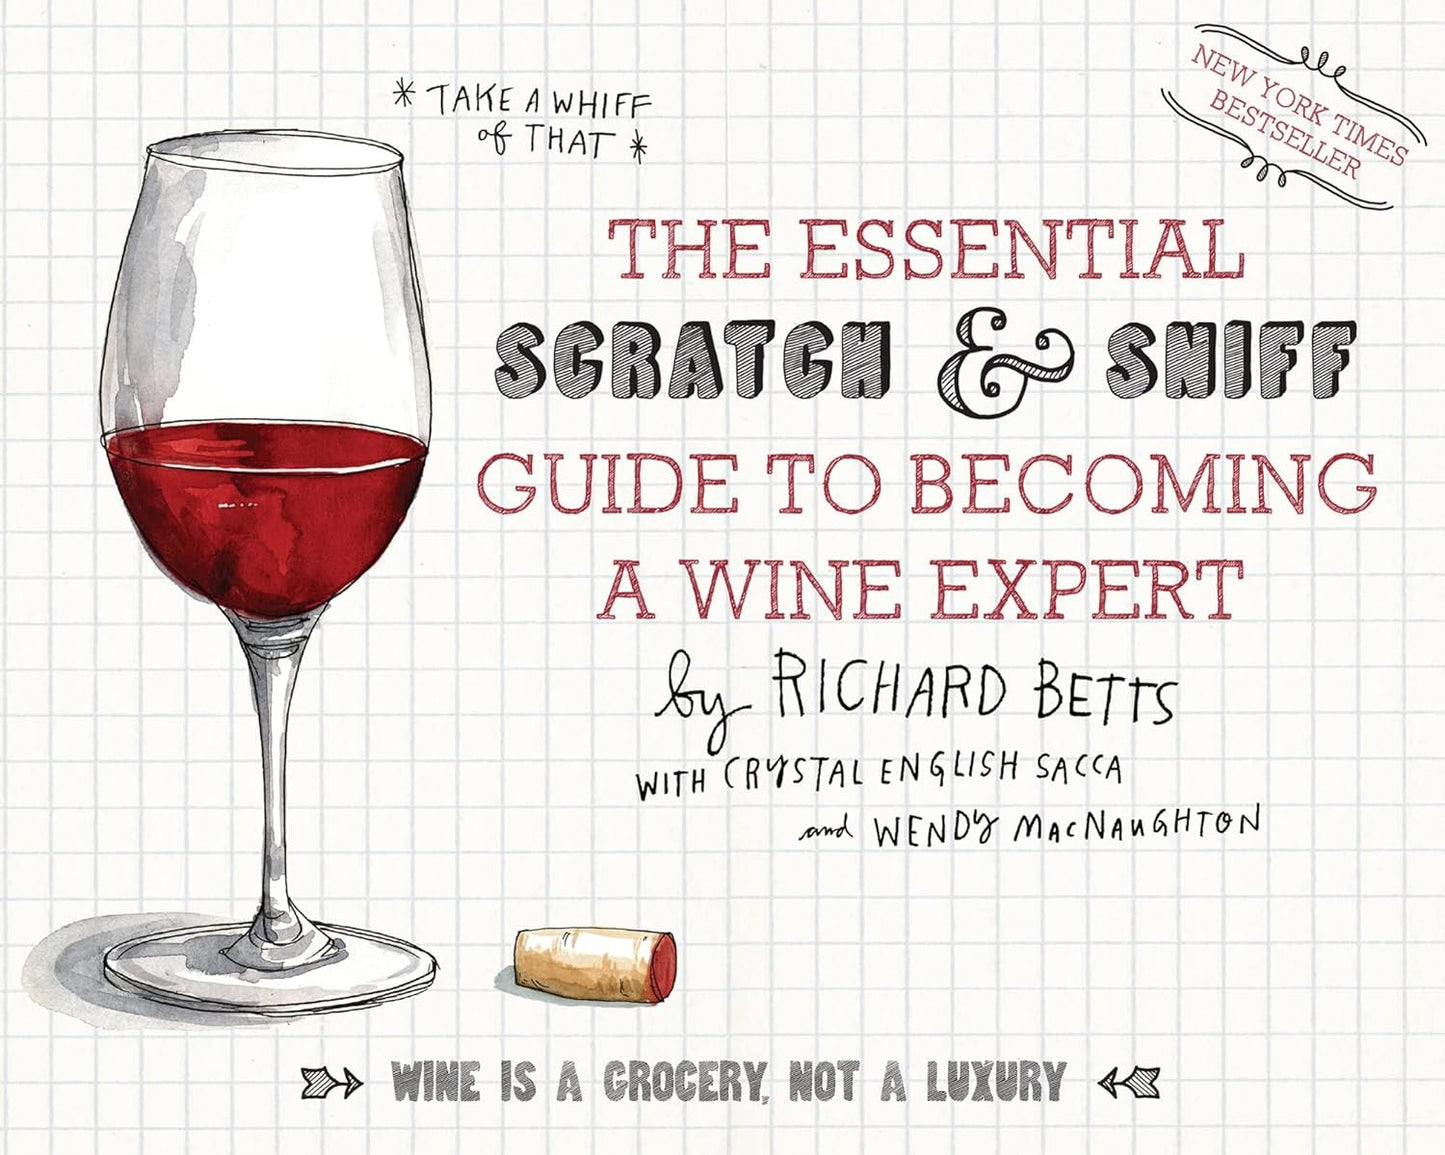 The Essential Scratch & Sniff Guide To Becoming A Wine Expert: Take a Whiff of That